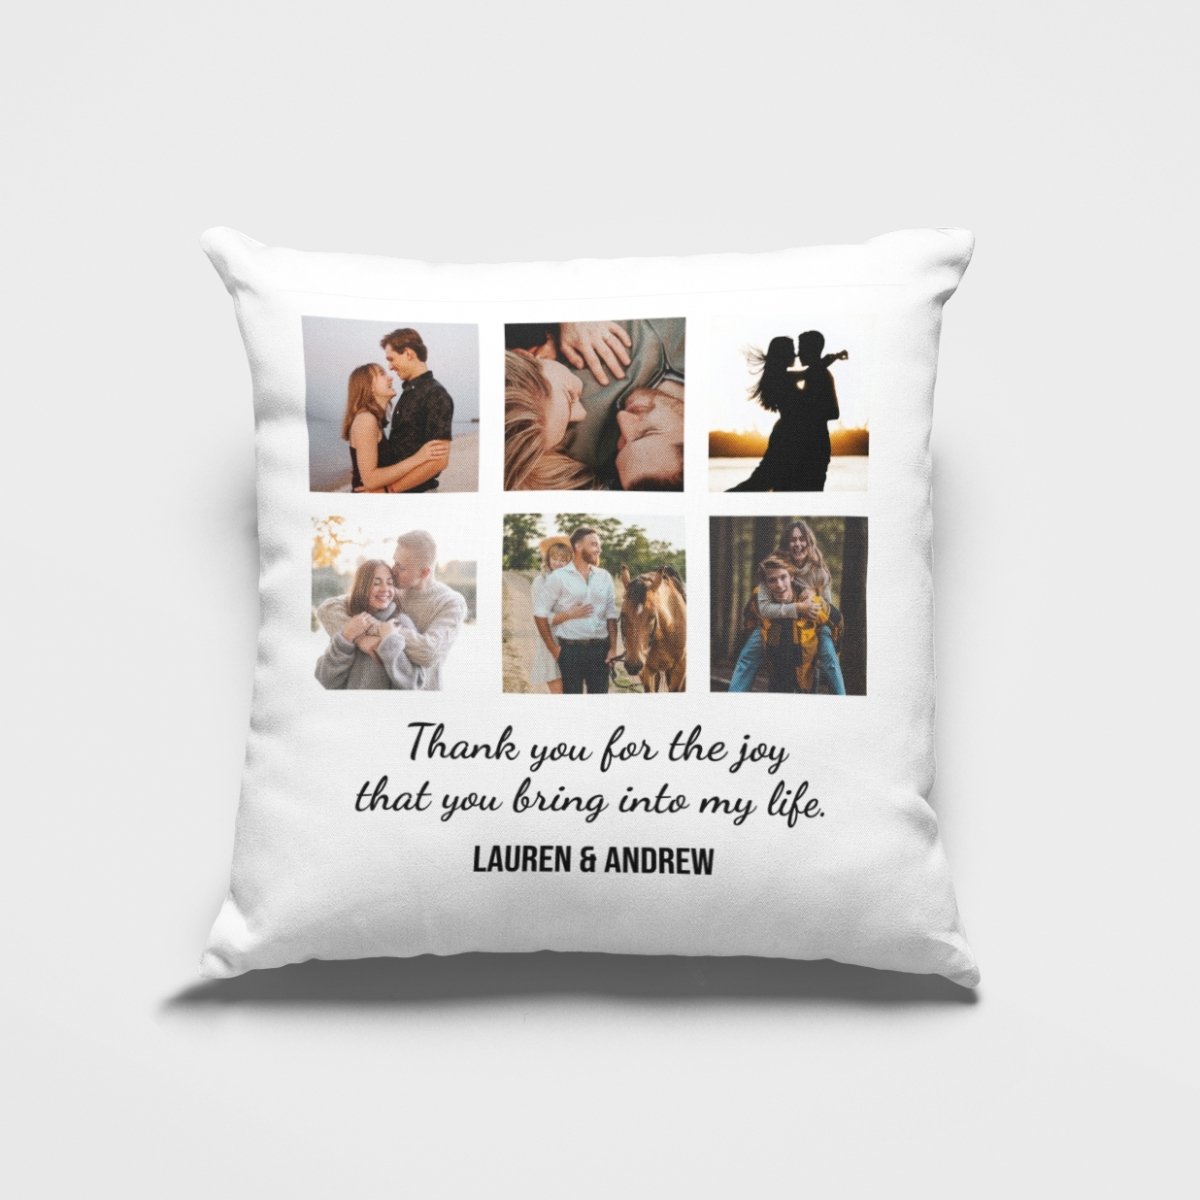 The 10 Best Customizable Gifts for Couples - CoupleGifts.com